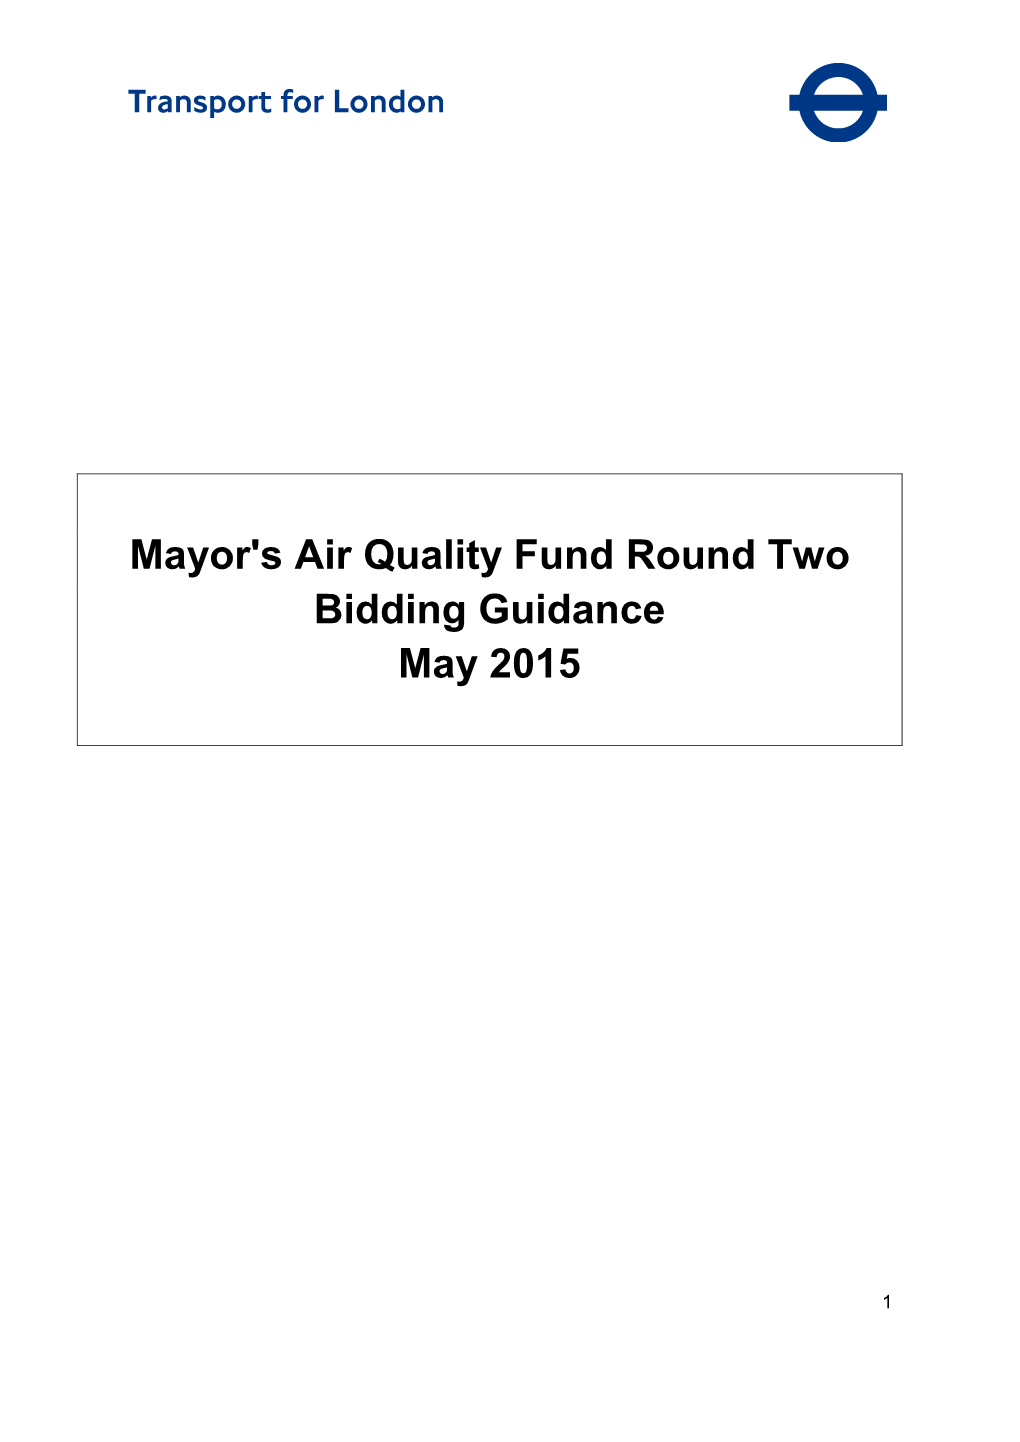 Mayor's Air Quality Fund Round Two Bidding Guidance May 2015